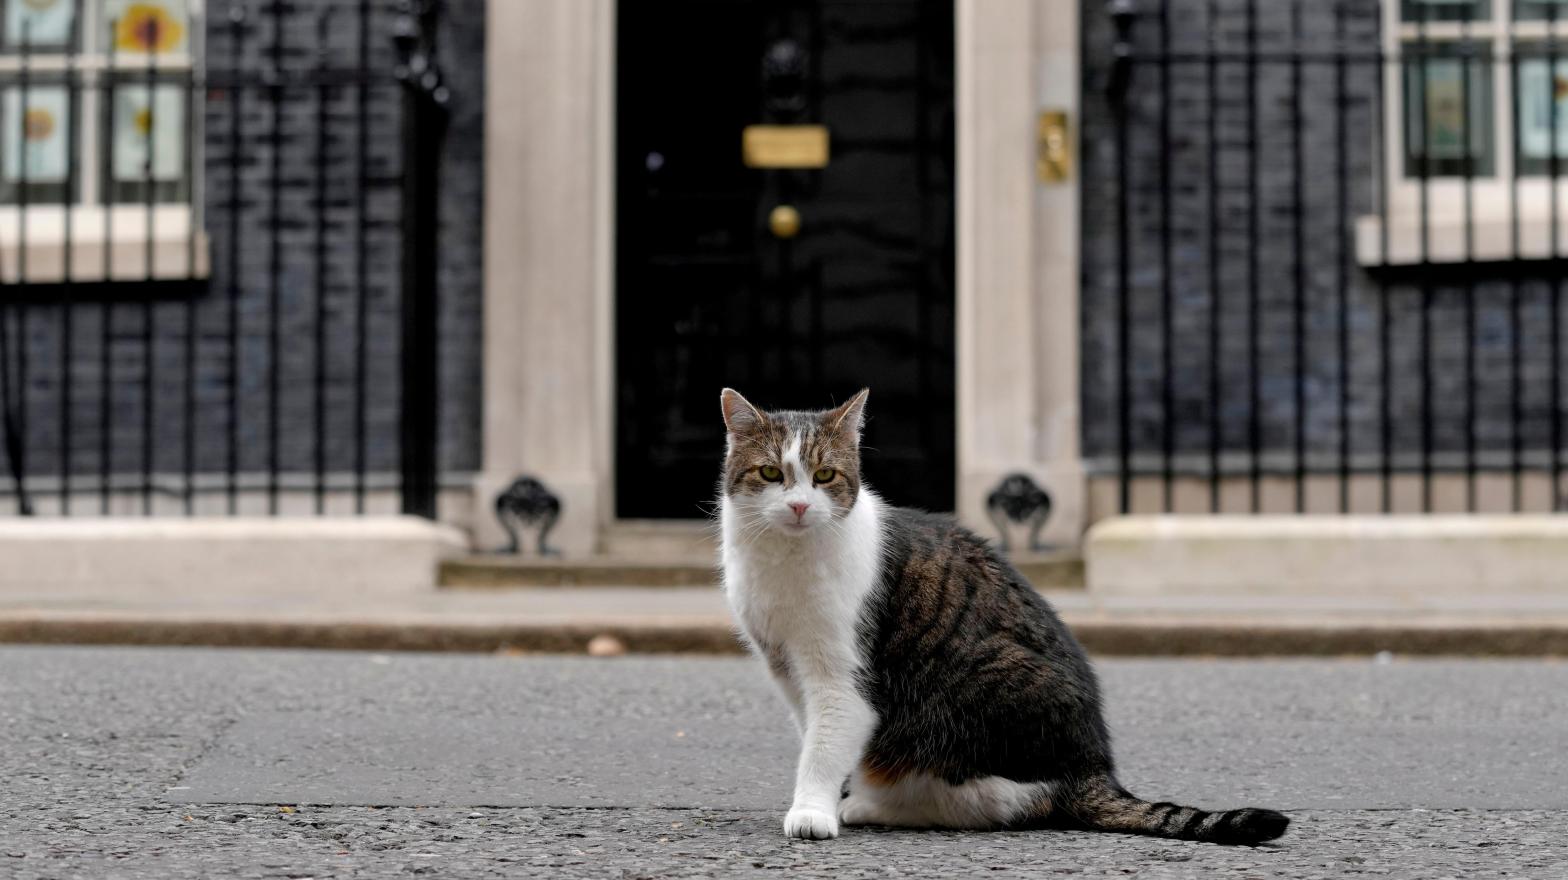 Larry the Cat, the UK cabinet office's ratcatcher in residence, sits poised outside 10 Downing Street. (Photo: Kirsty Wigglesworth, AP)